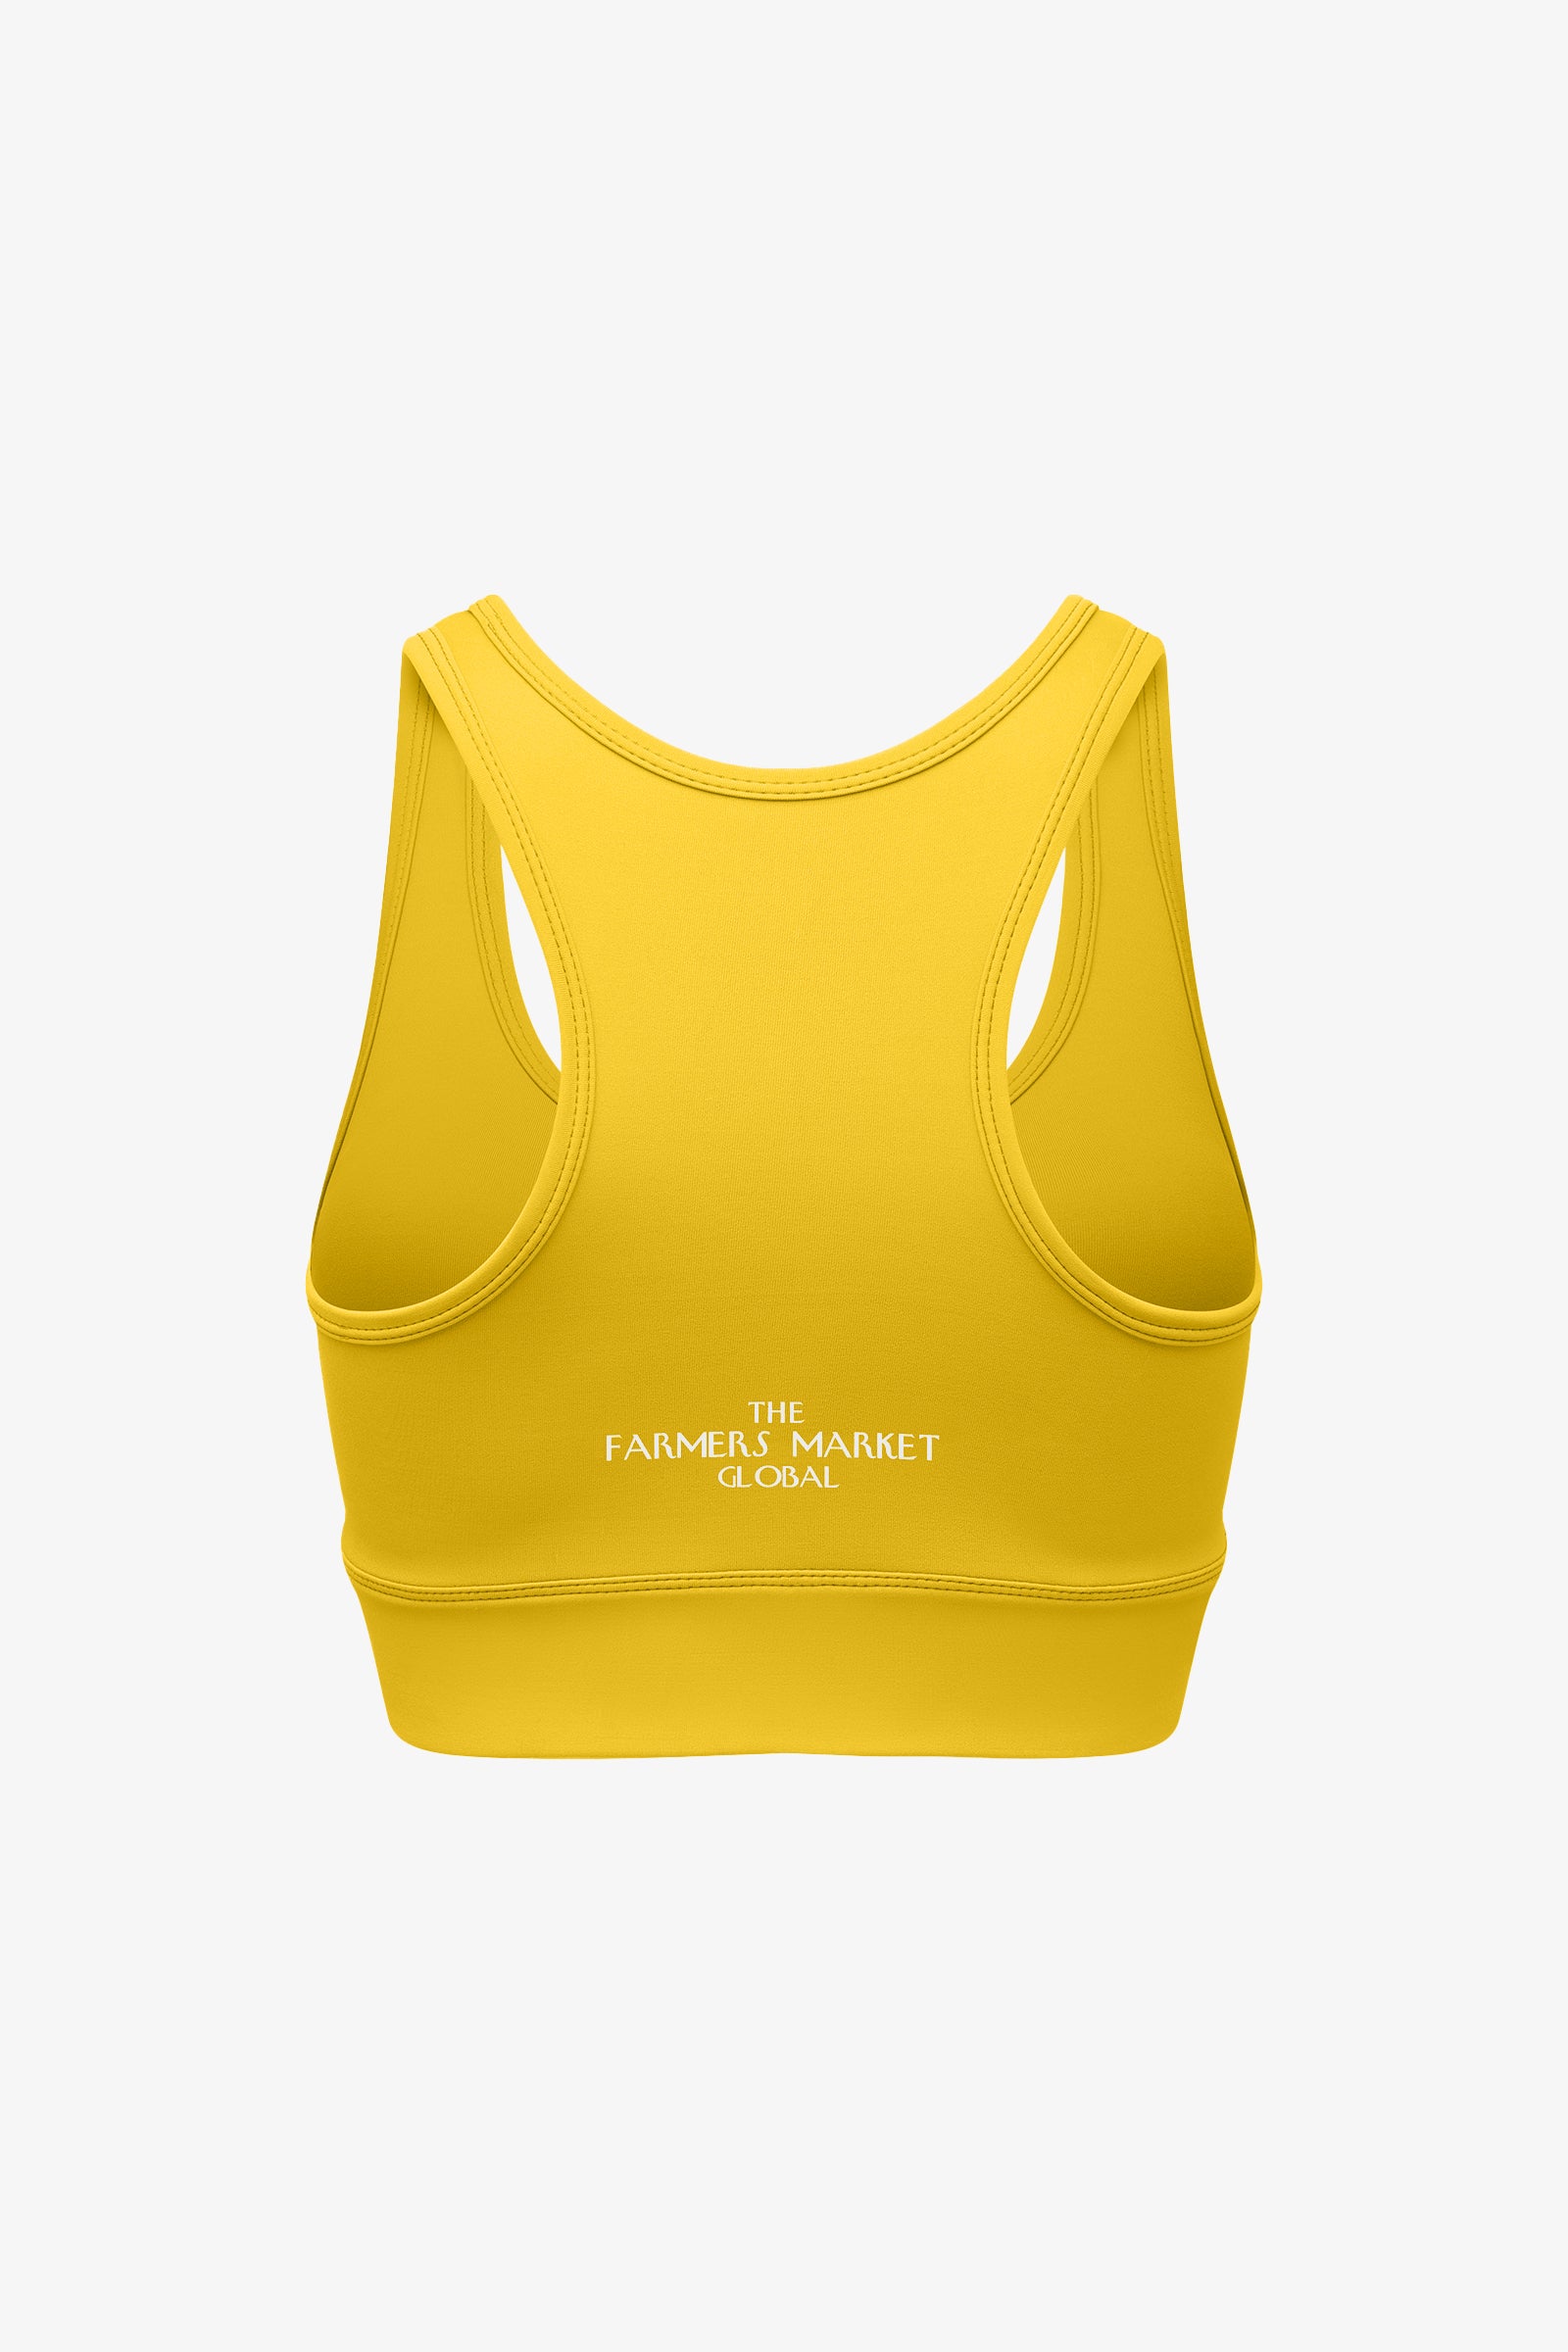 Sports Bras Market Trends From 2023 to 2032, by Shubham Phartade